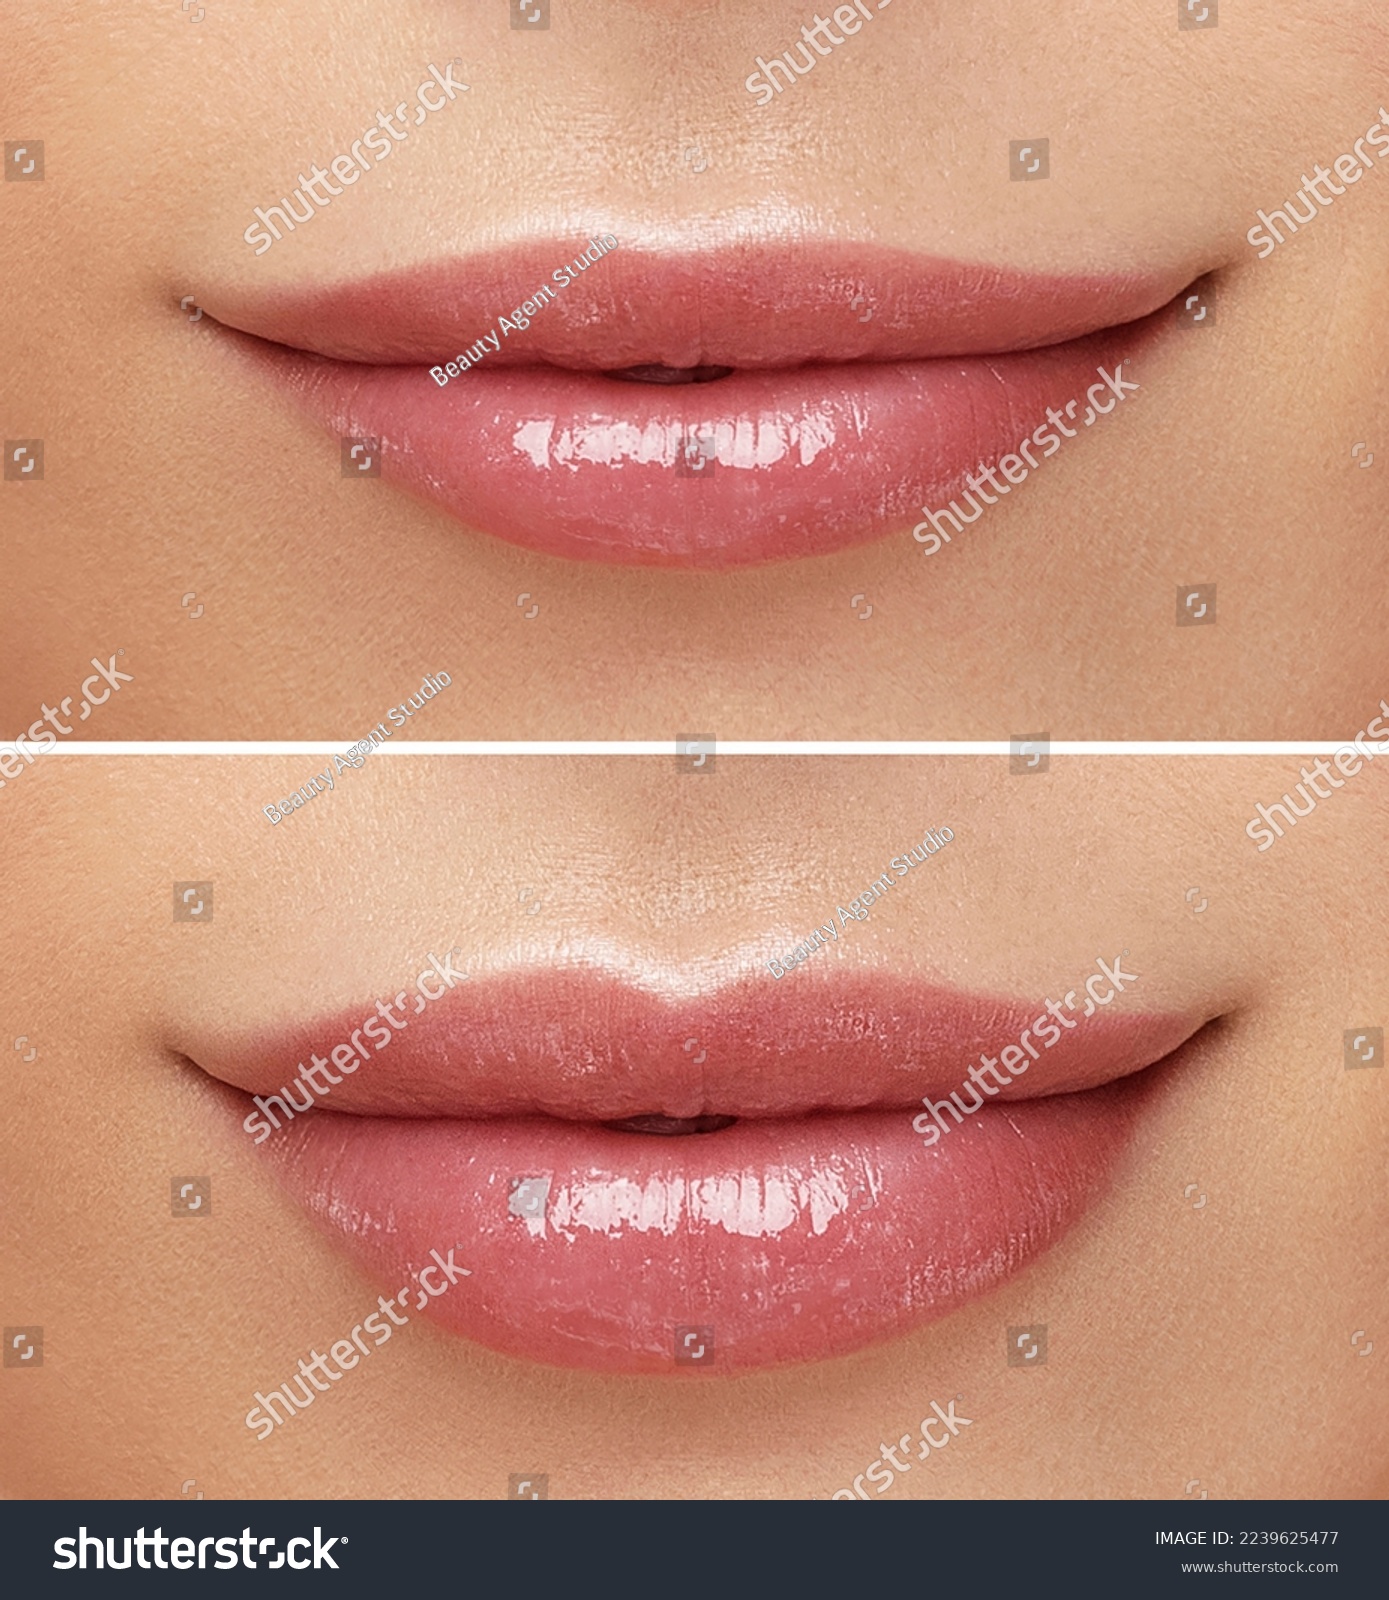 Women lips correction before and after comparison. Hyaluronic acid injection. Beauty lip treatment procedure.  #2239625477